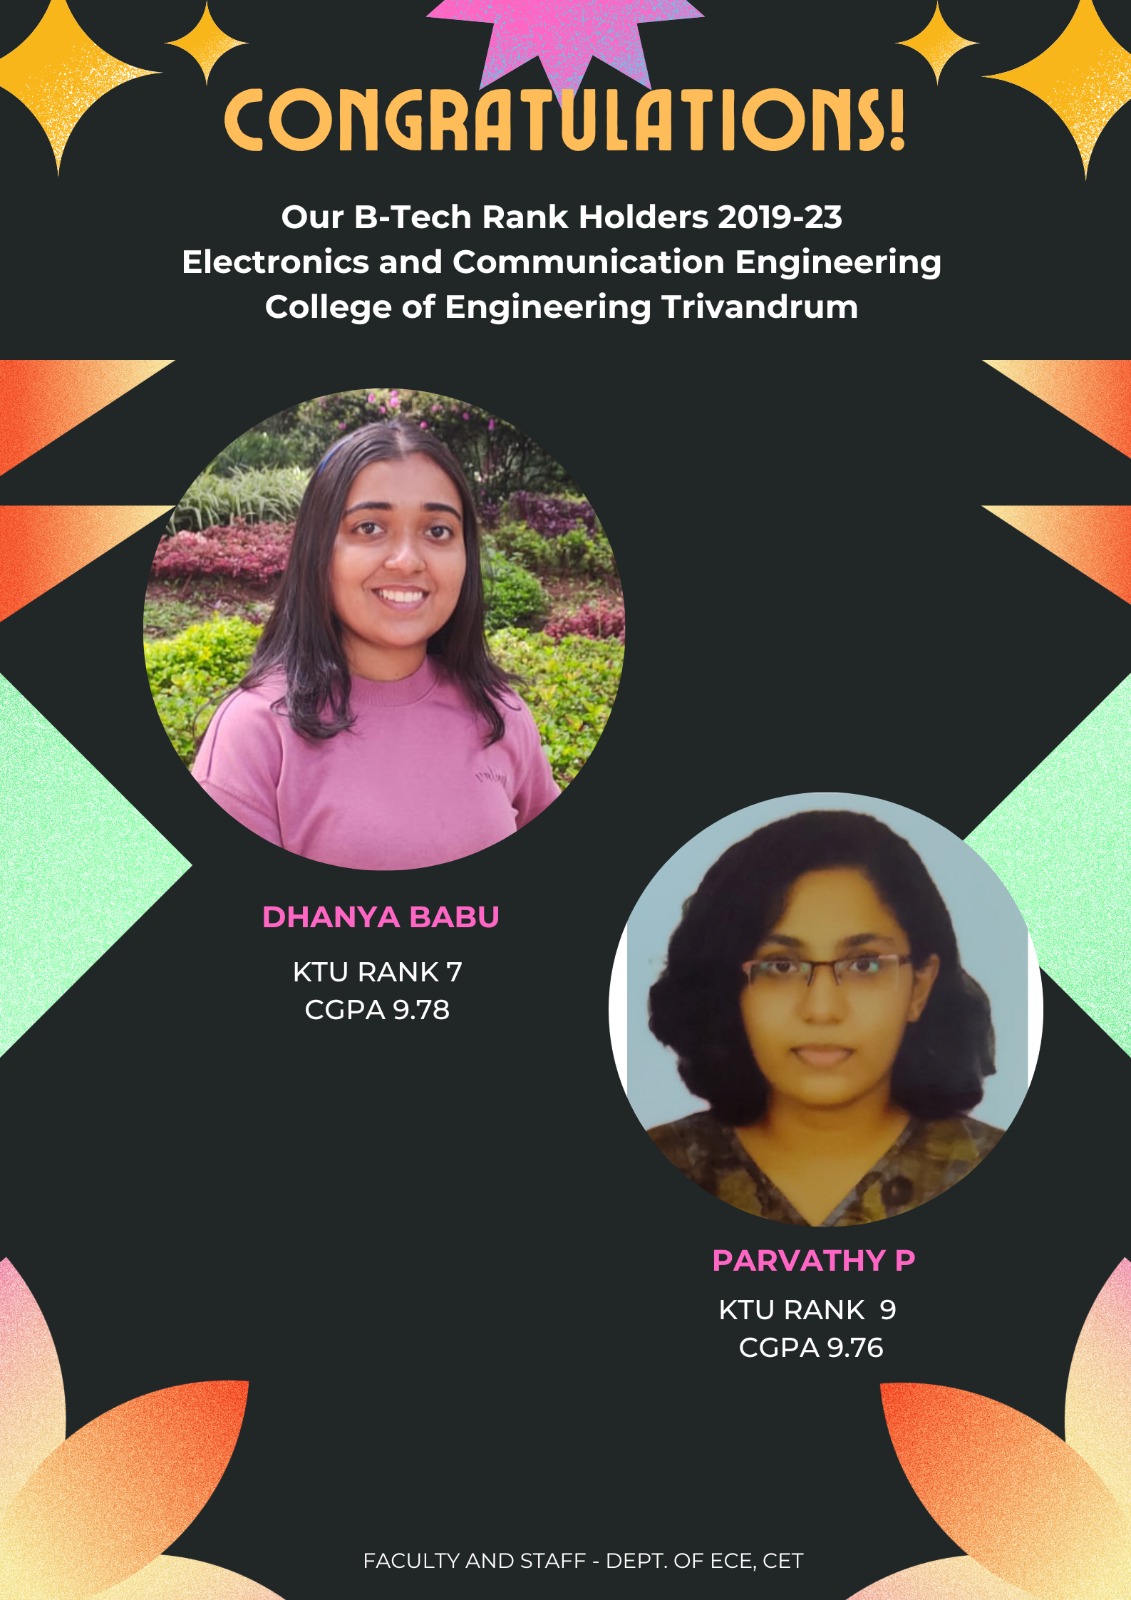 B.Tech Rank Holders 2019 - 23 Department of Electronics and Communication Engineering